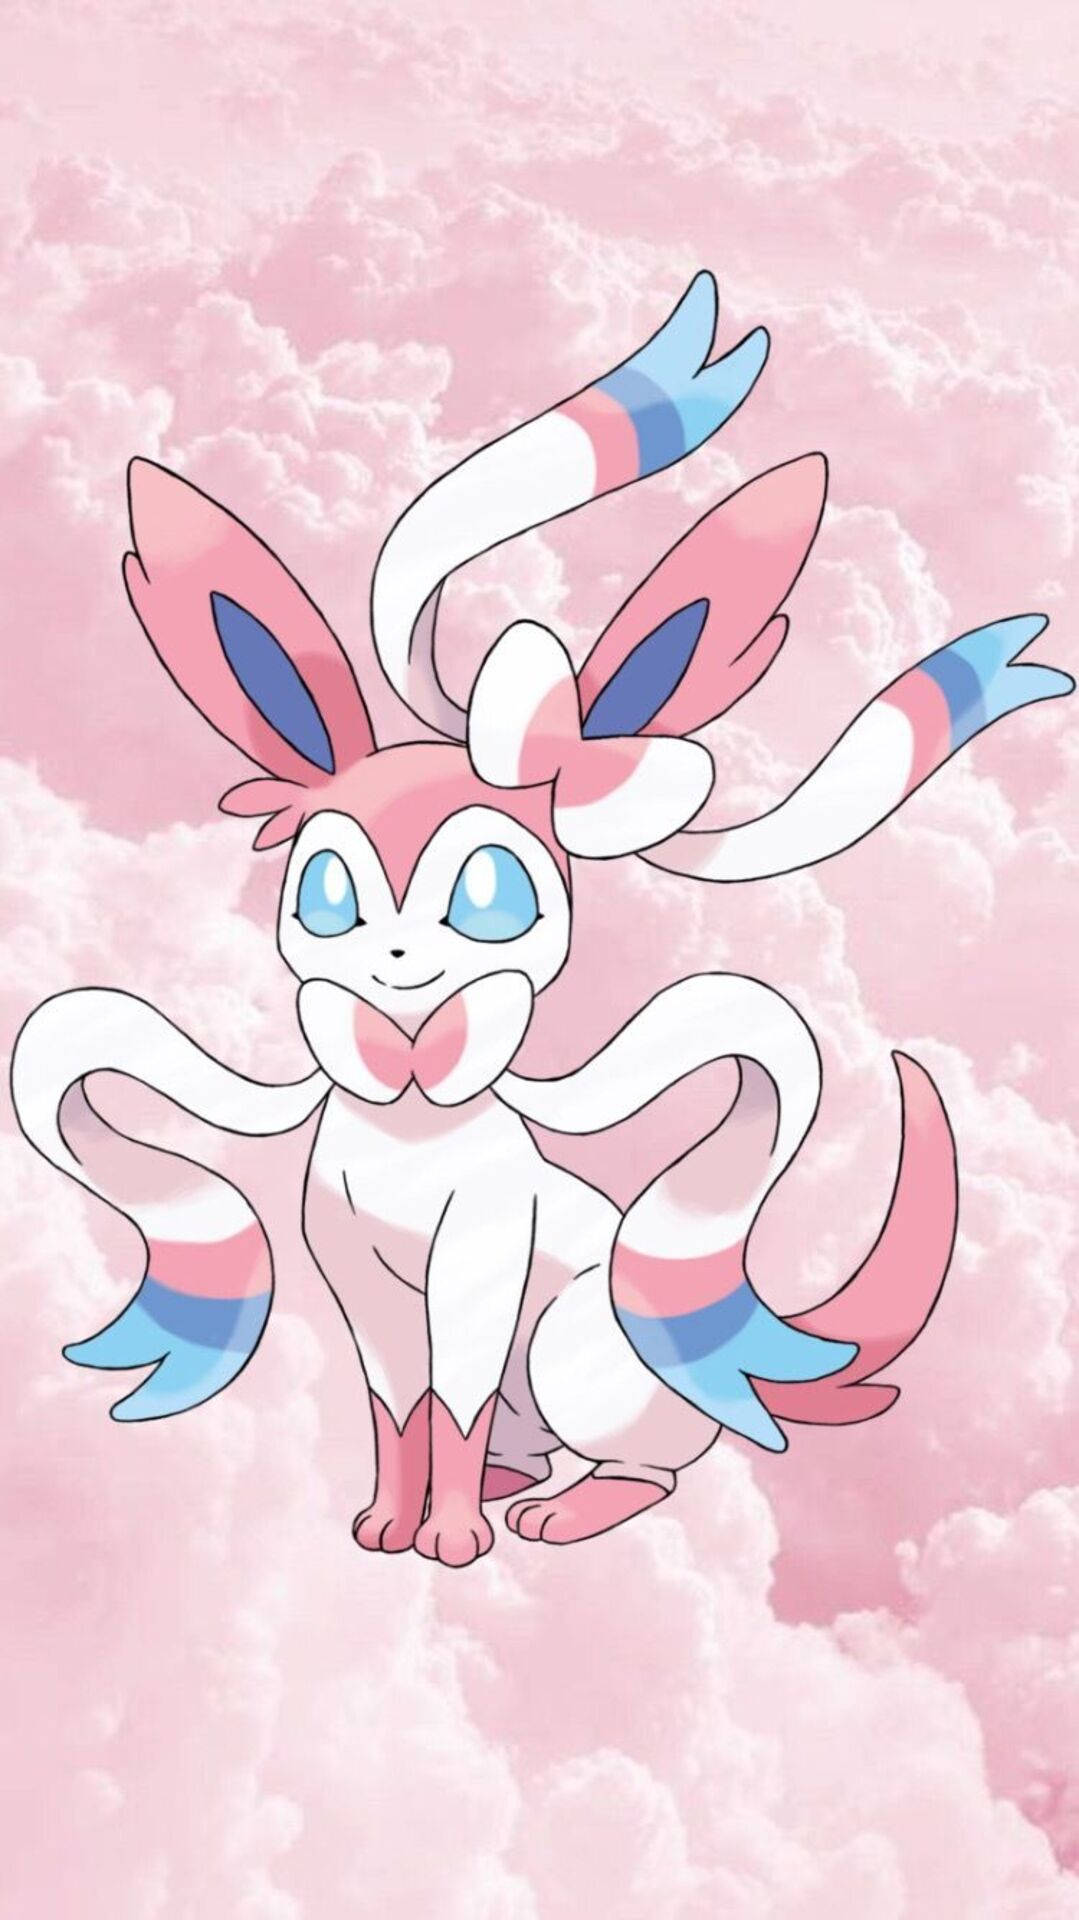 A gentle Sylveon enveloped in beautiful pink clouds Wallpaper